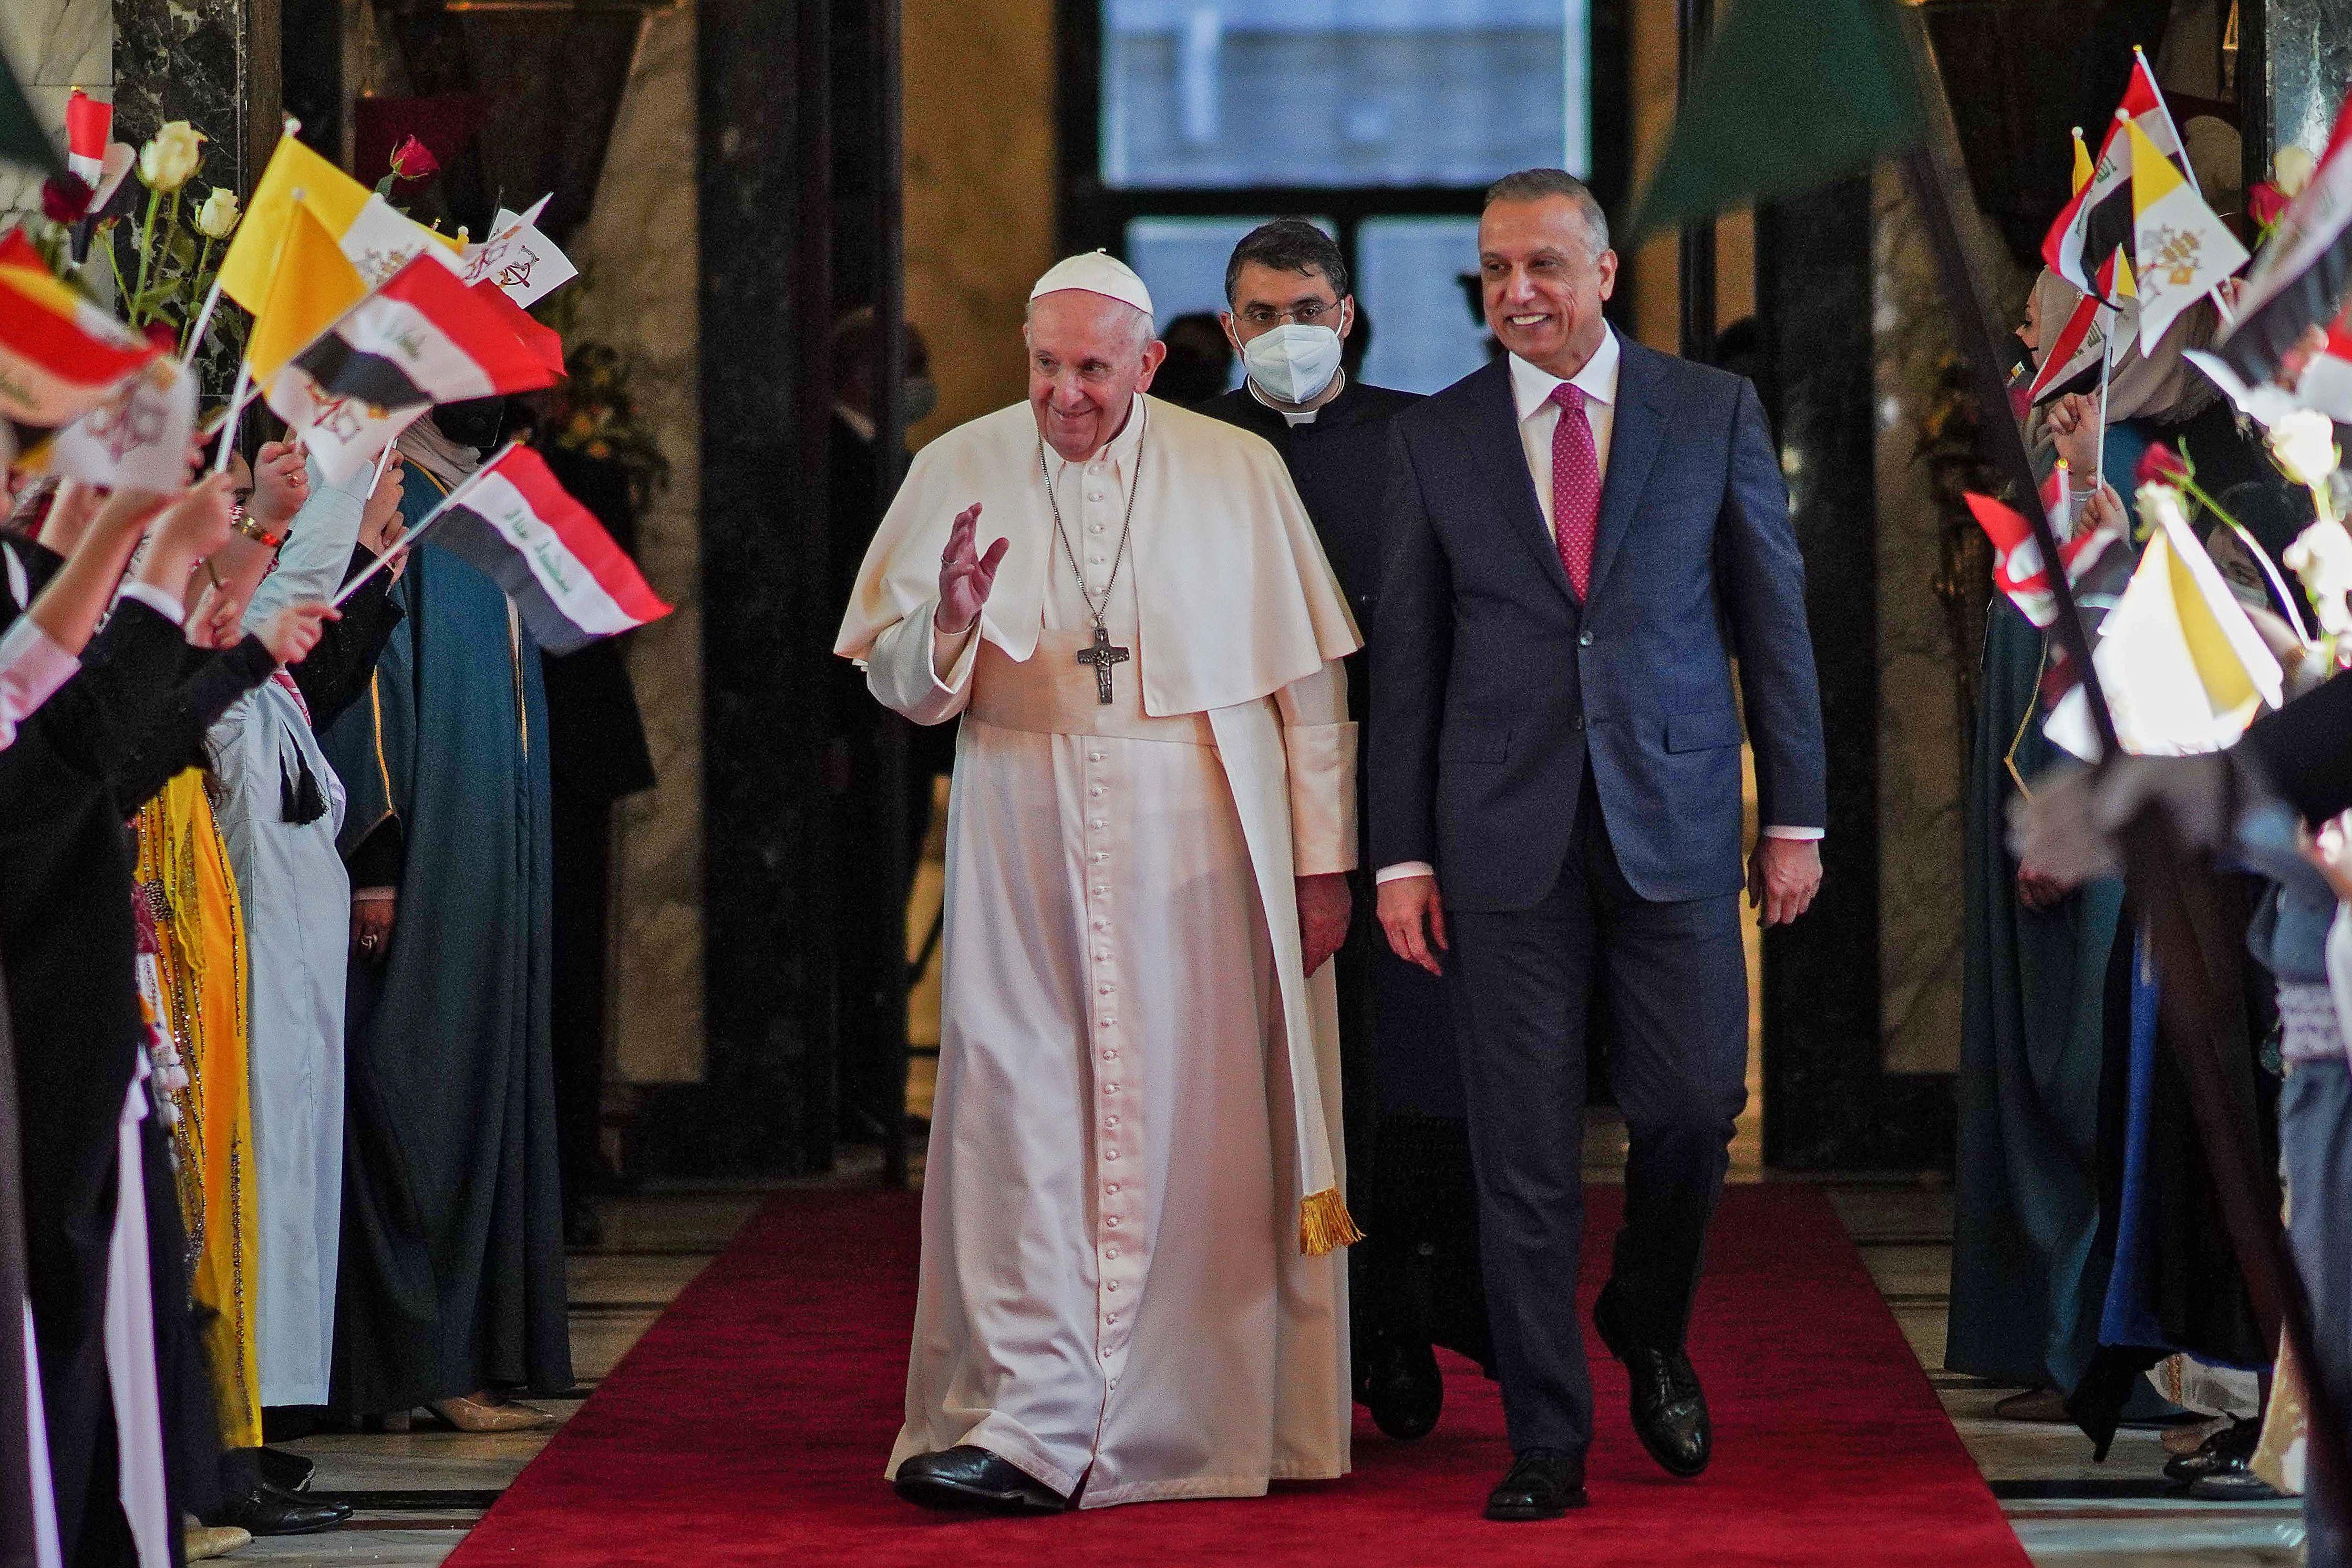 Pope Francis and Iraq's Prime minister walk down an aisle lined with people greeting them with flags.